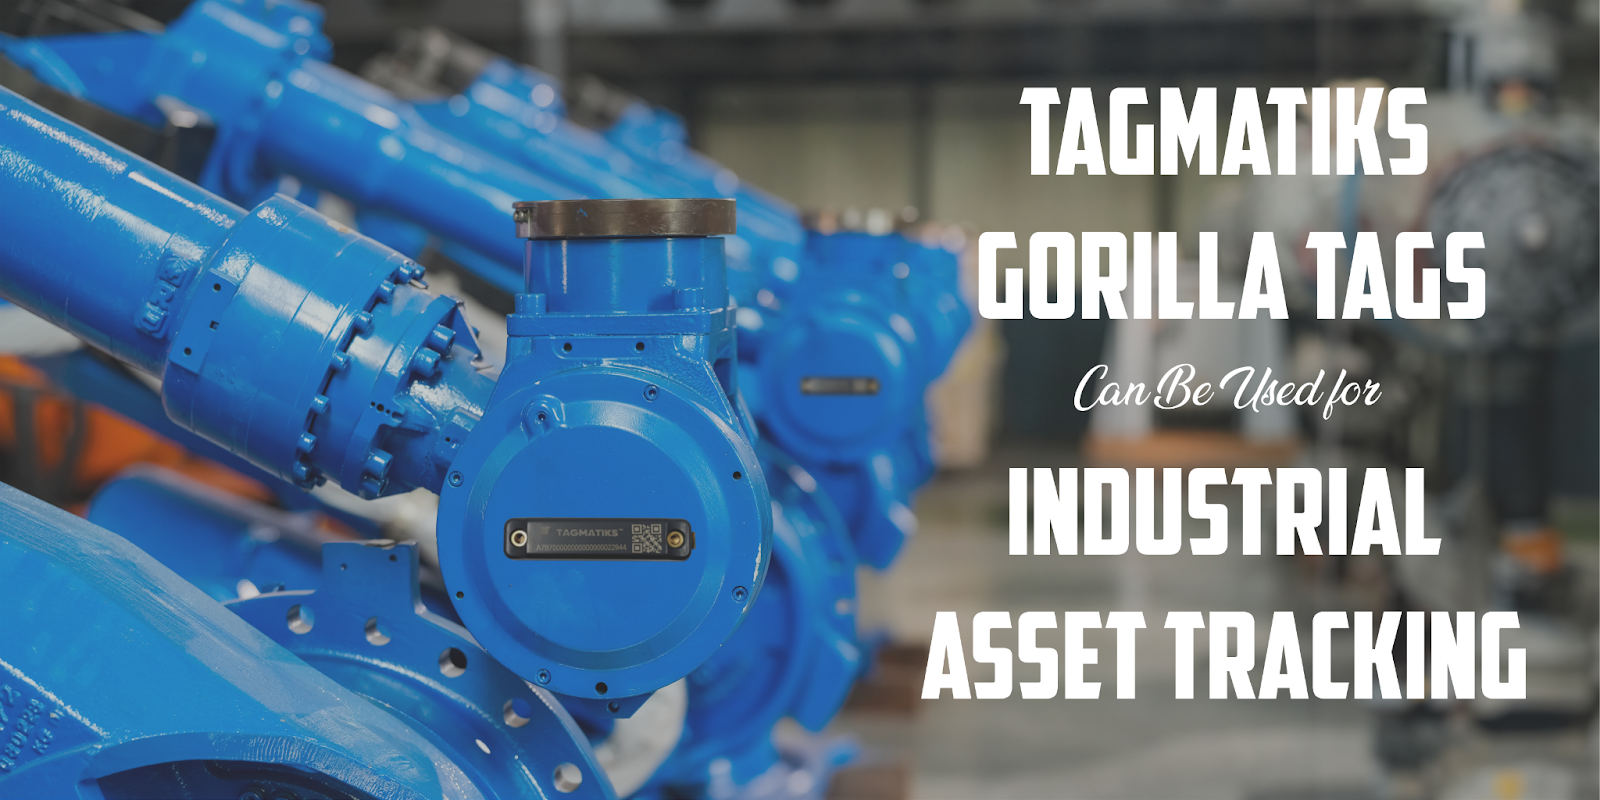 TagMatiks Gorilla RFID tags used for industrial asset tracking